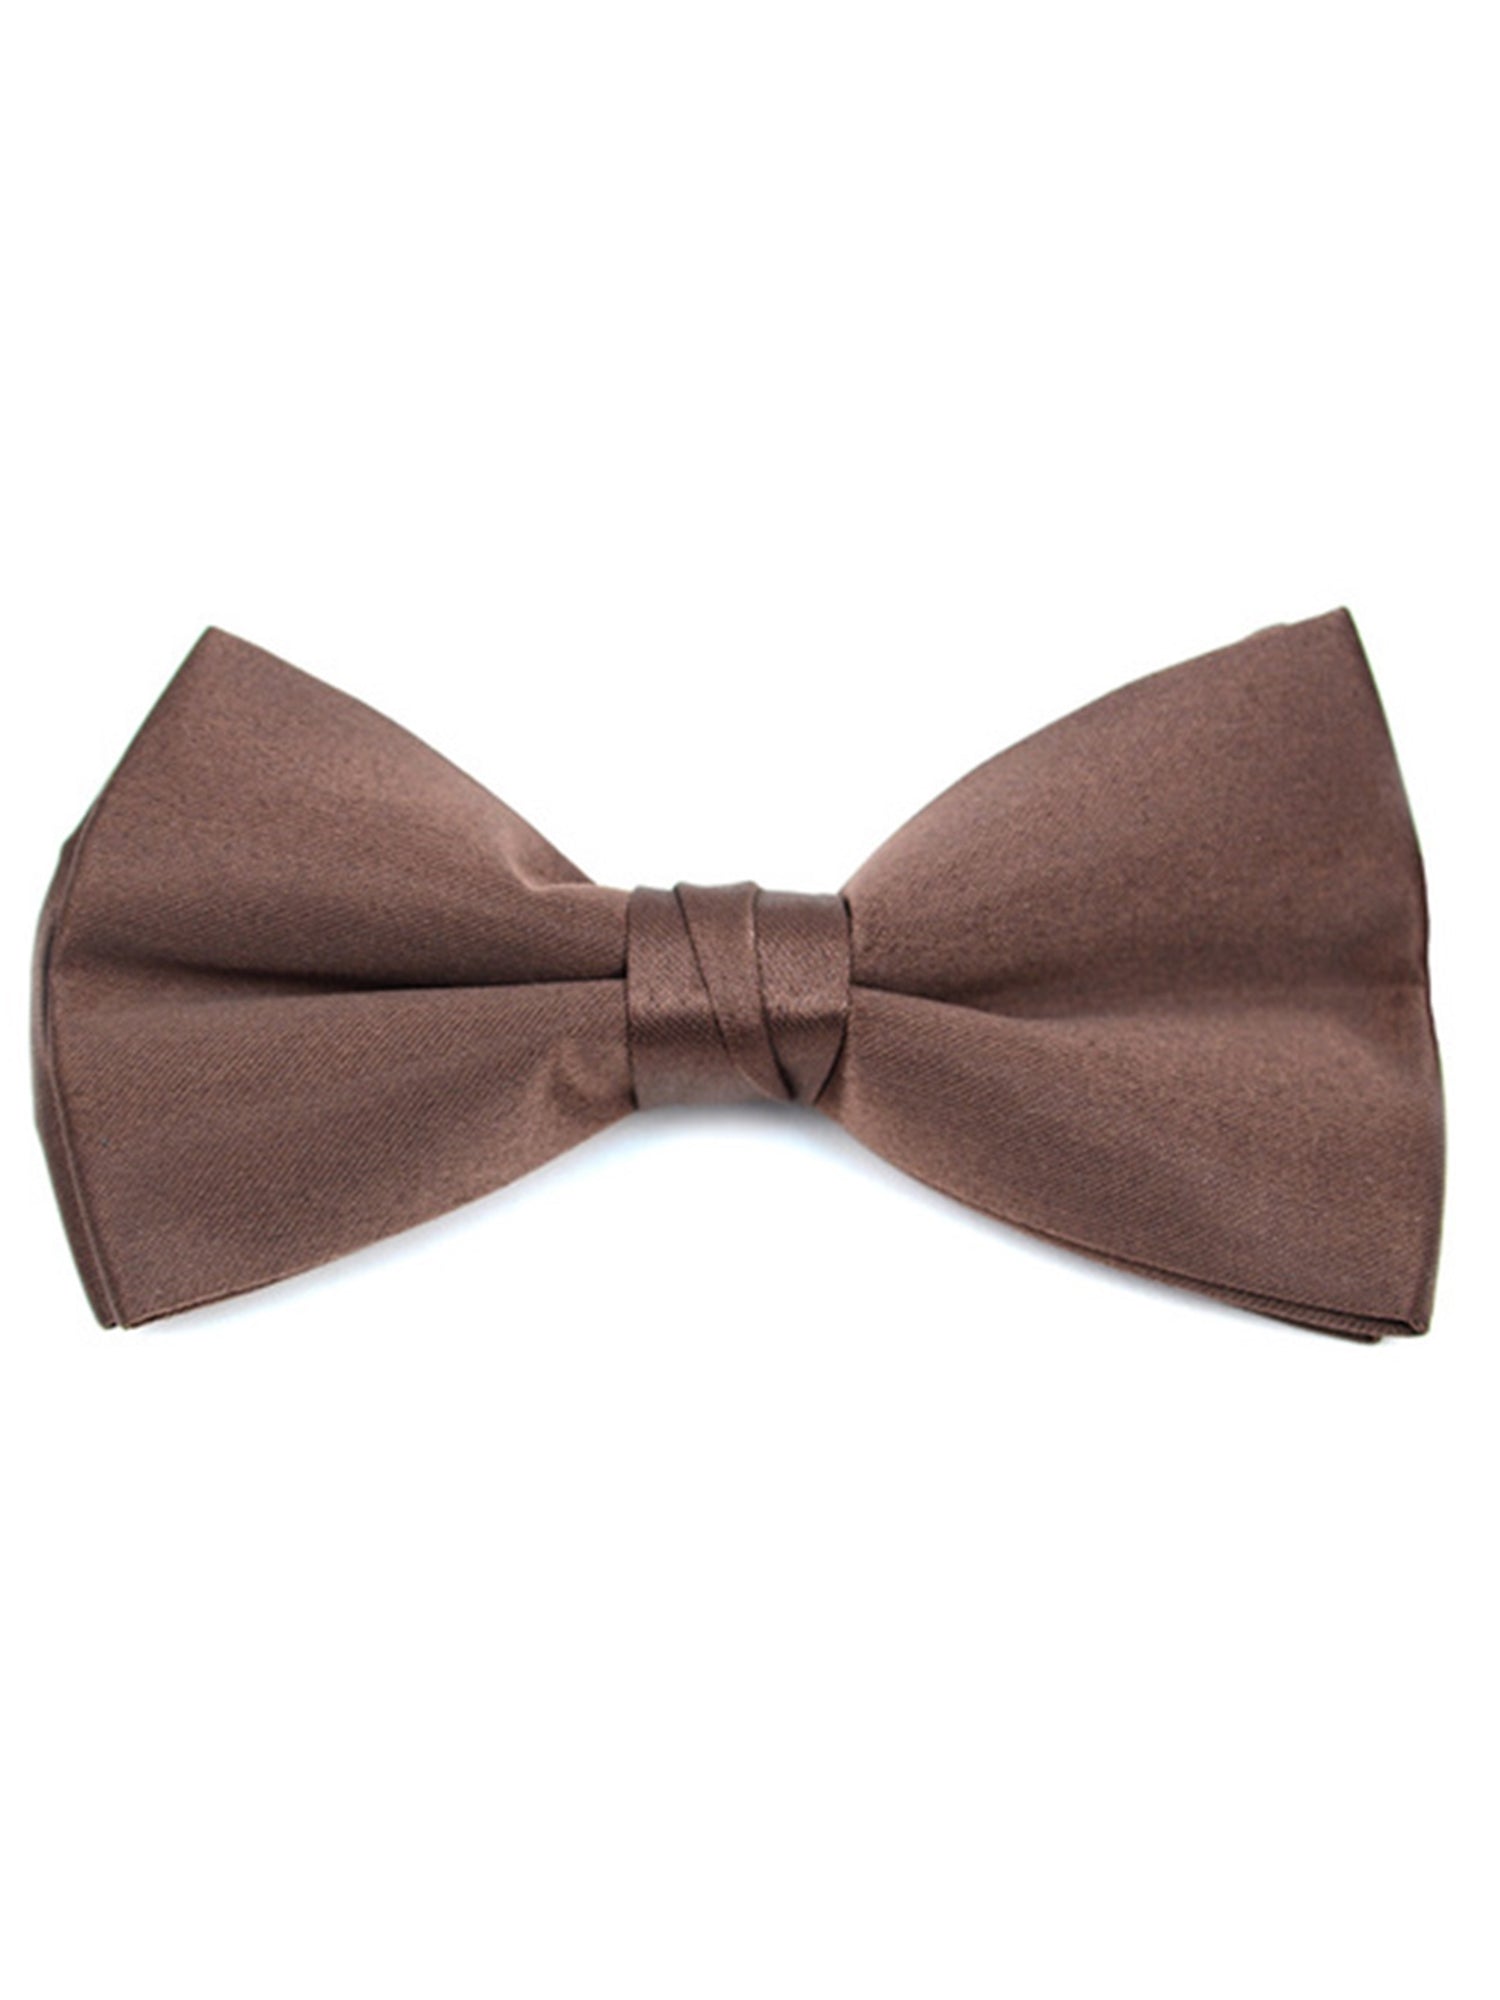 Young Boy's Pre-tied Clip On Bow Tie - Formal Tuxedo Solid Color Boy's Solid Color Bow Tie TheDapperTie Brown One Size 